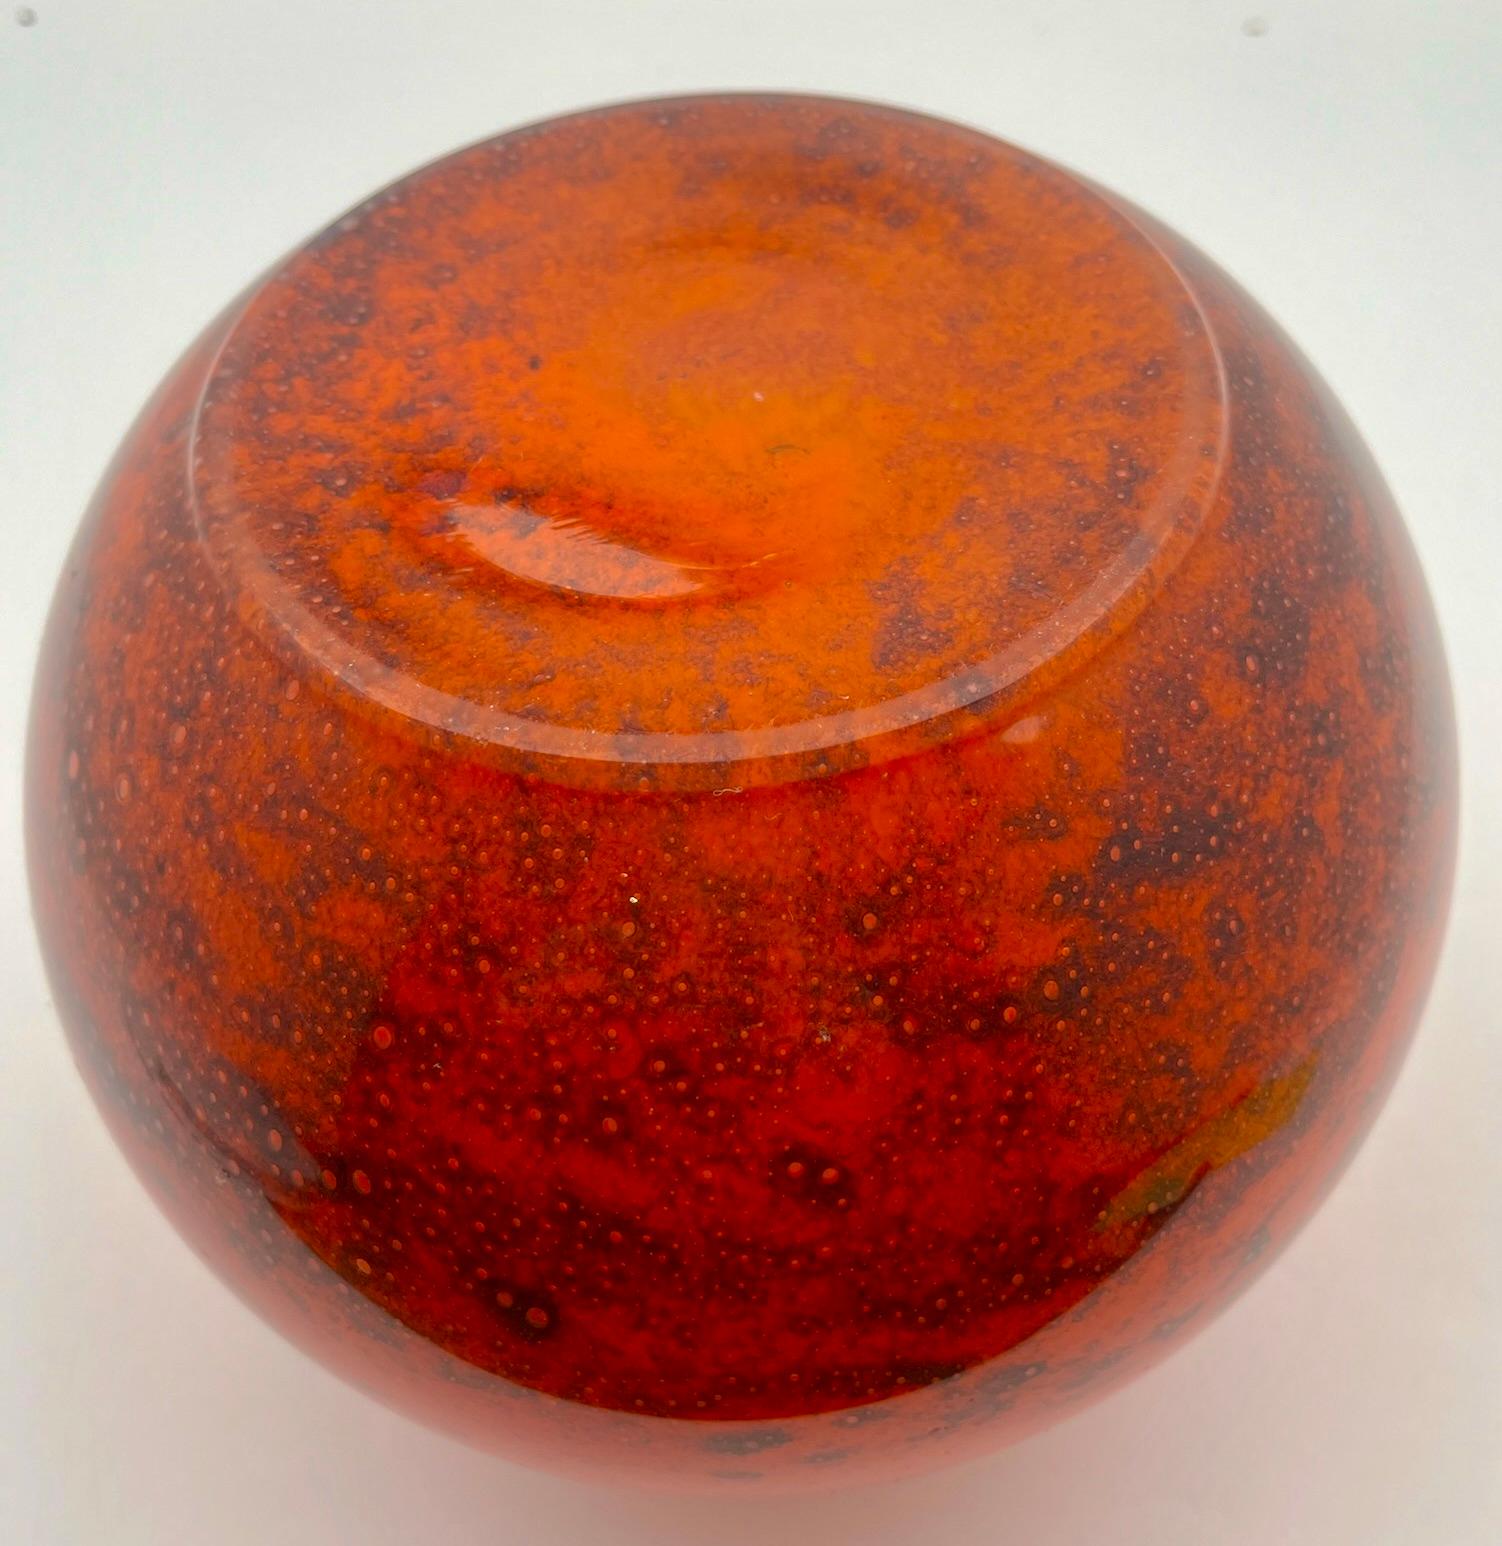 Ikora Art Glass Vase, Produced, by WMF in Germany, 1930s by Karl Wiedmann For Sale 1